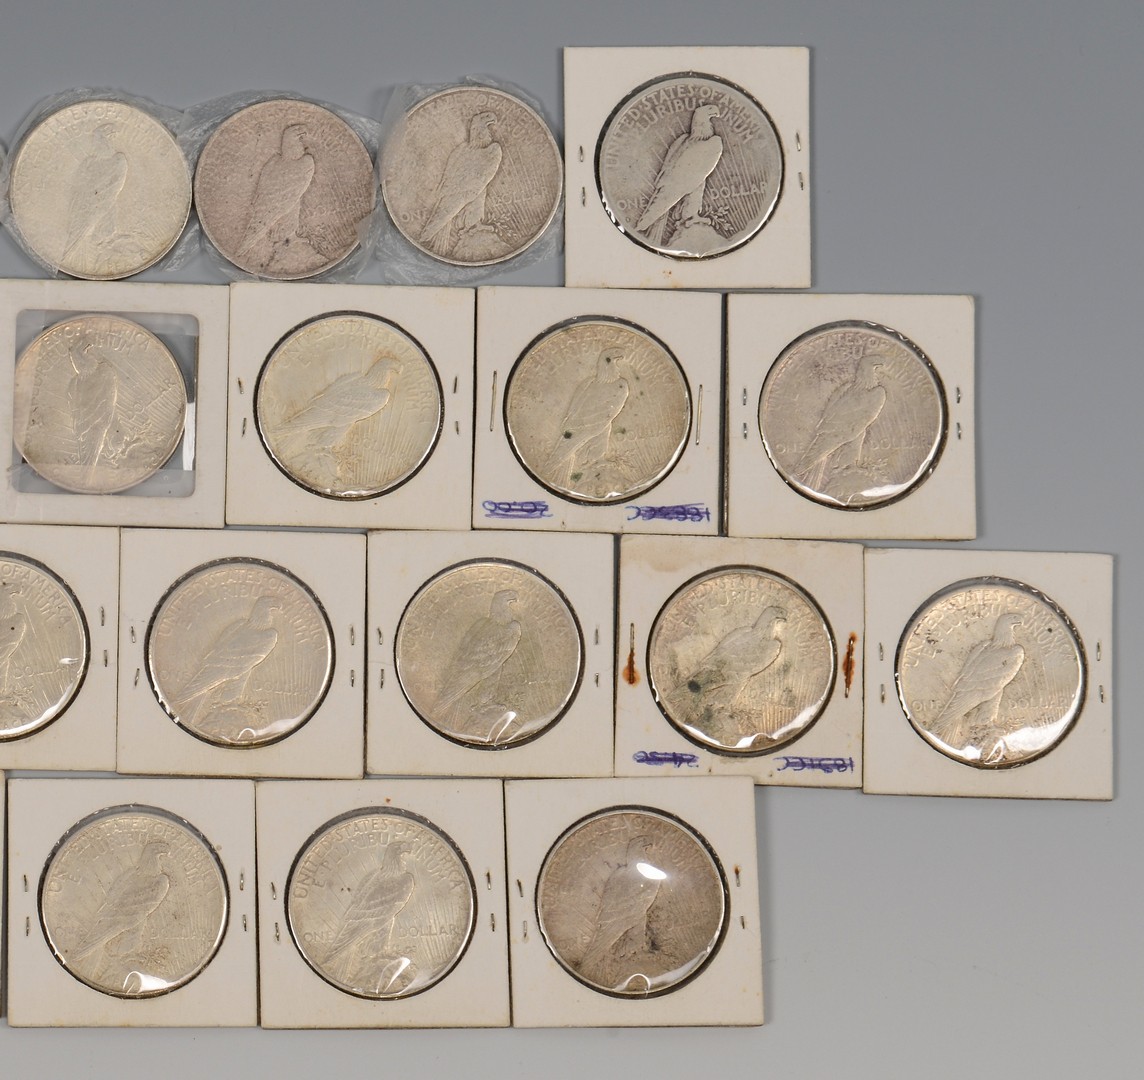 Lot 866: Group of 31 Silver Peace Dollars, 1922-1924